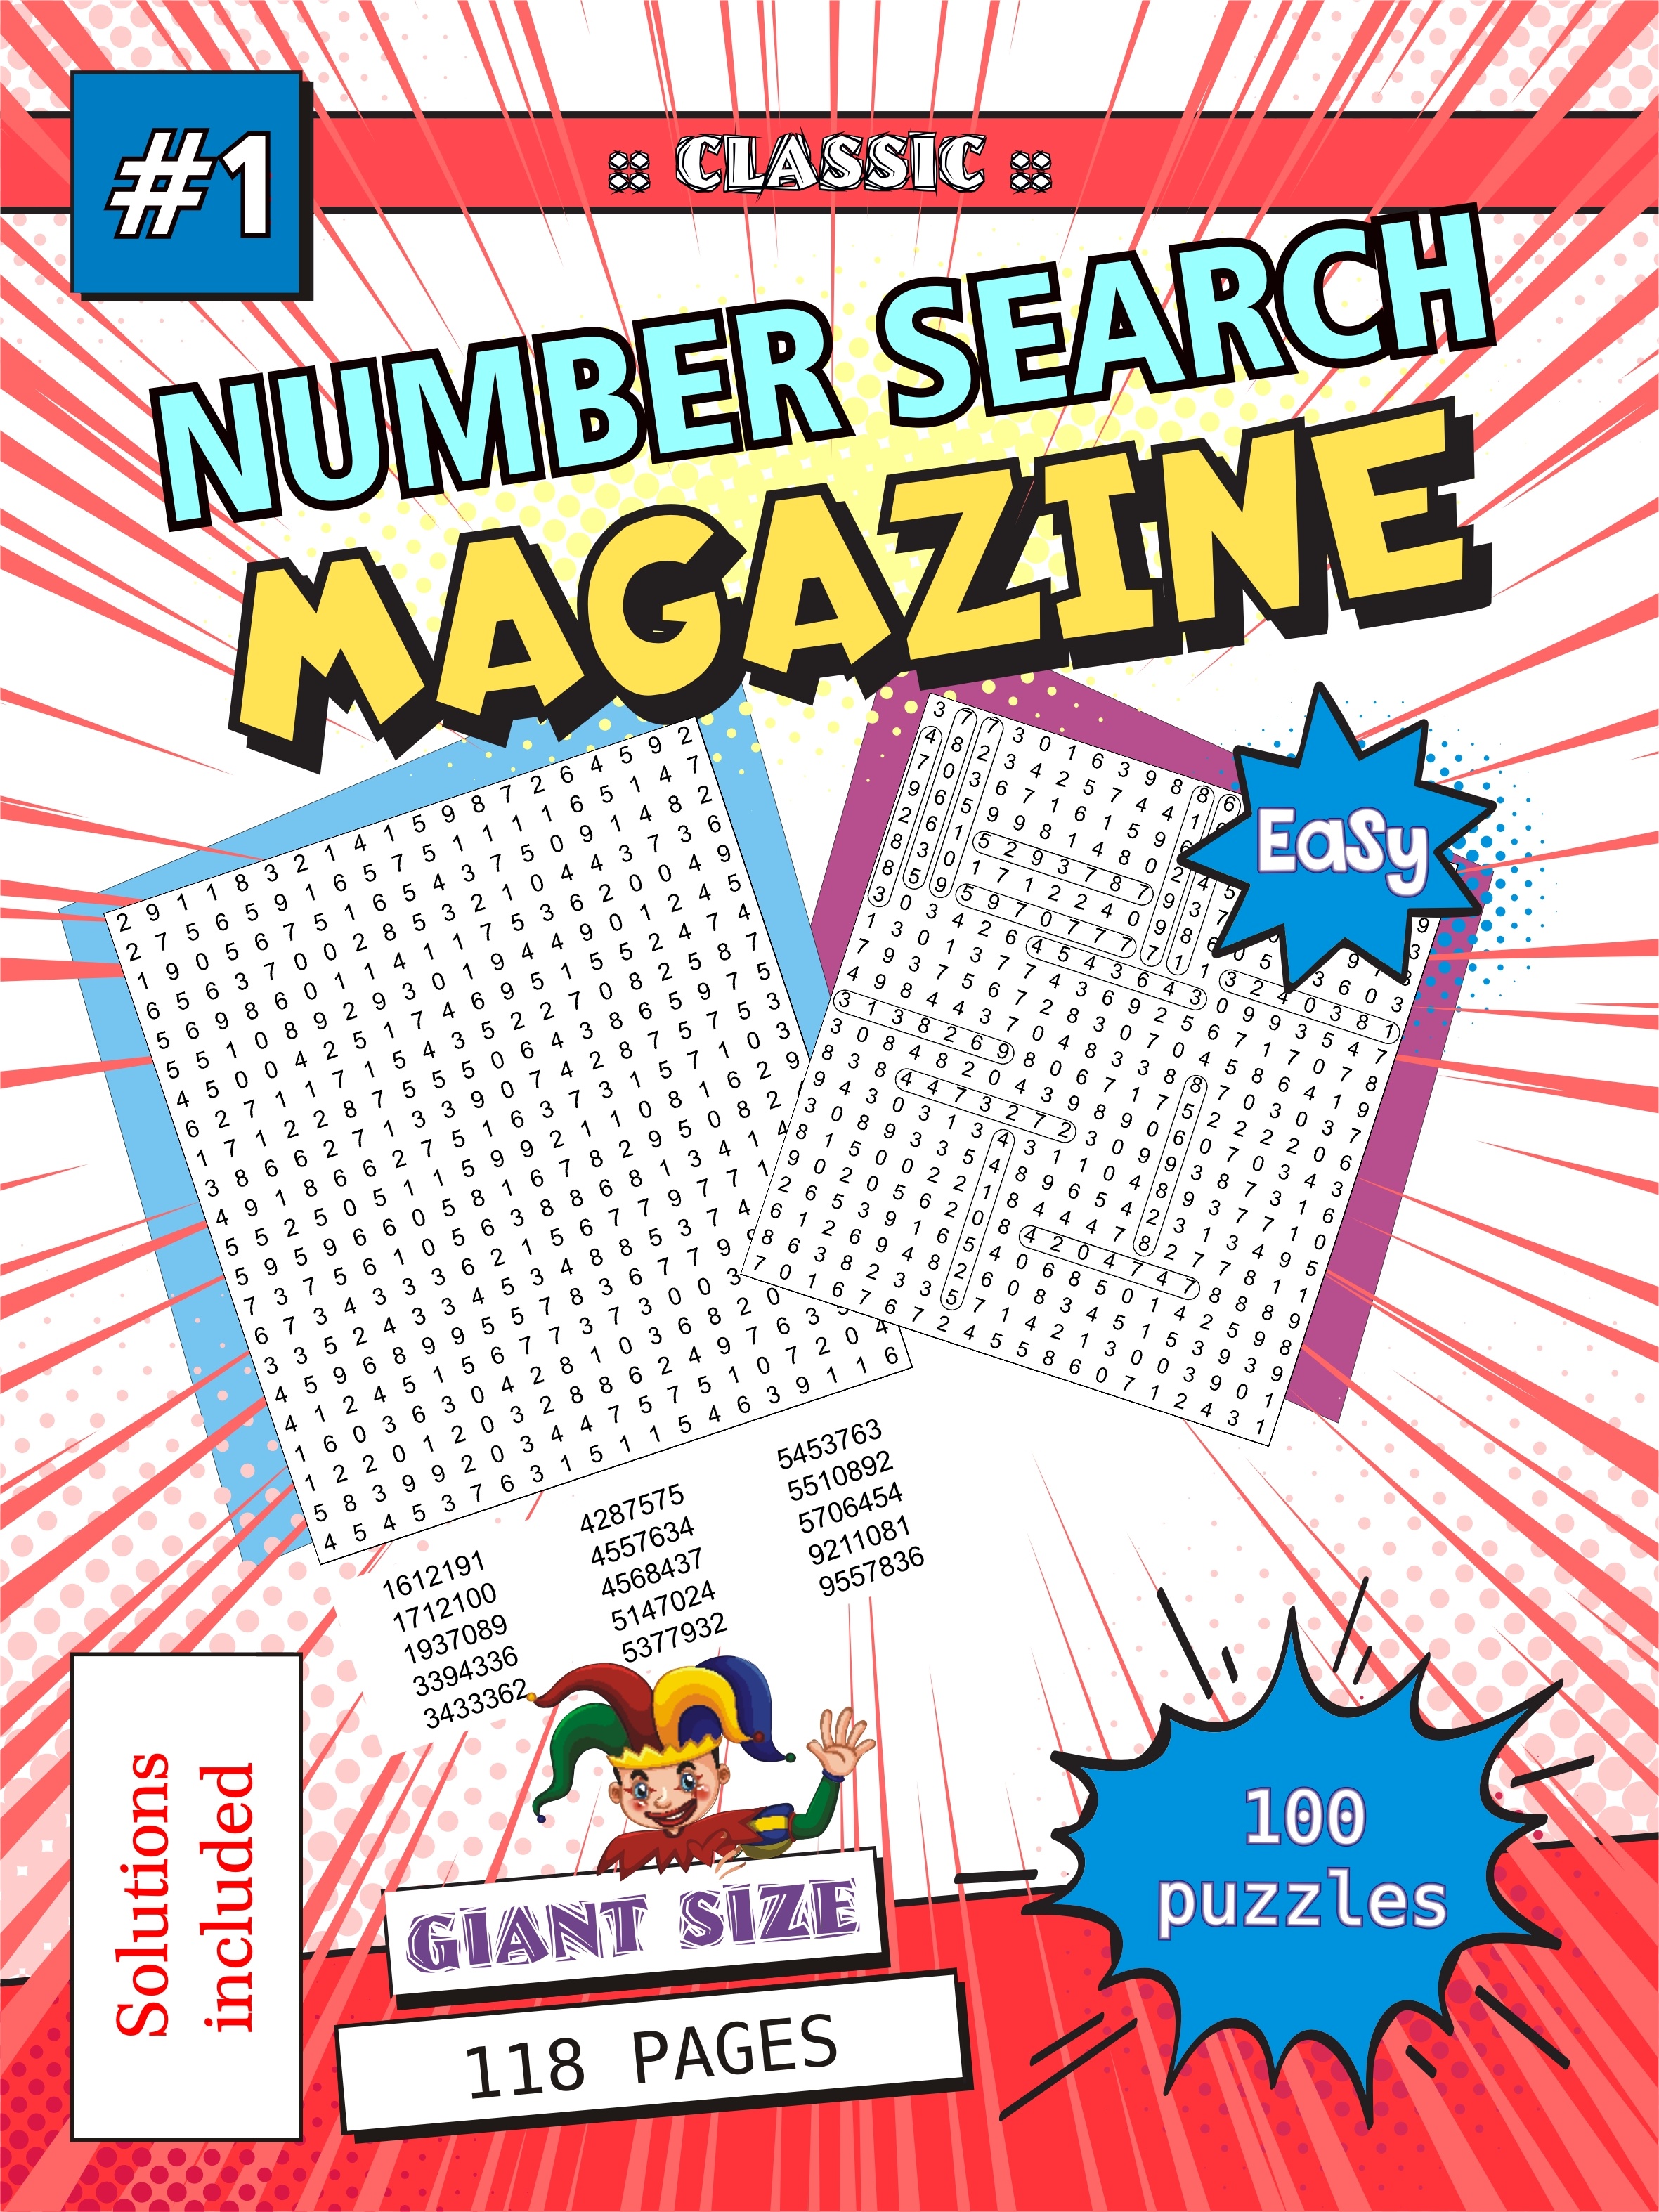 Number Search Magazine, vol. 1 